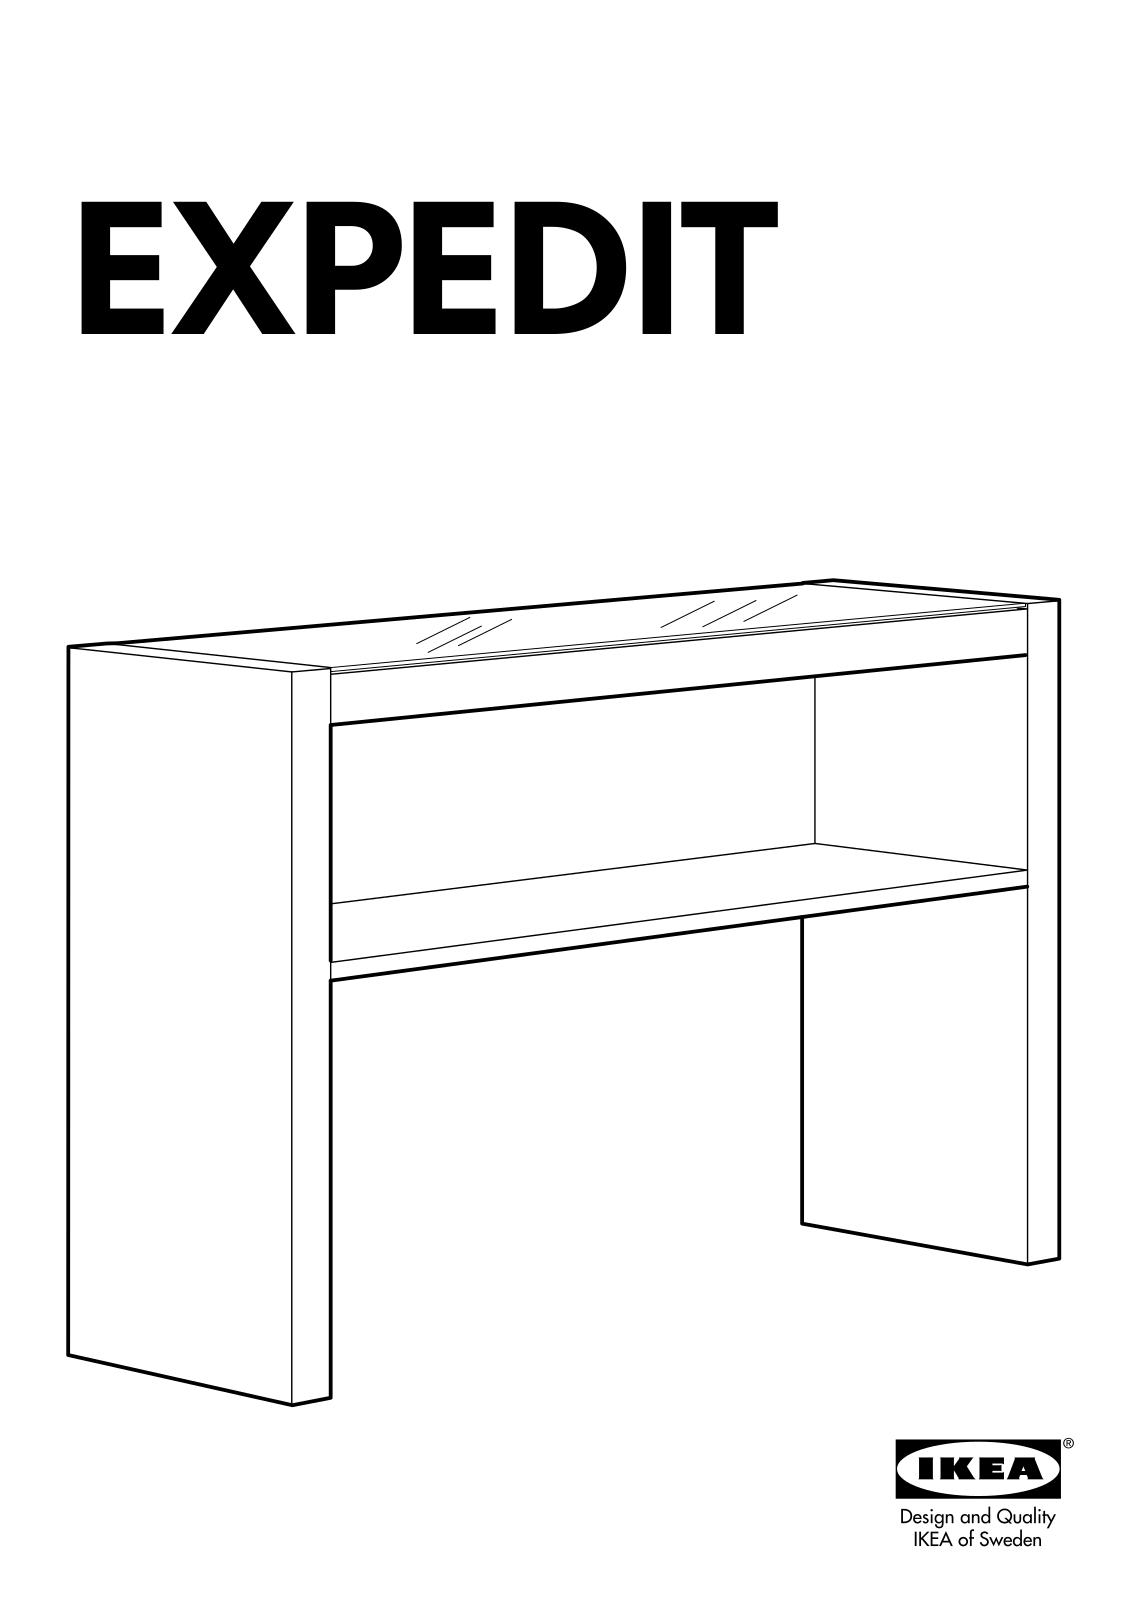 IKEA EXPEDIT CONSOLE TABLE User Manual